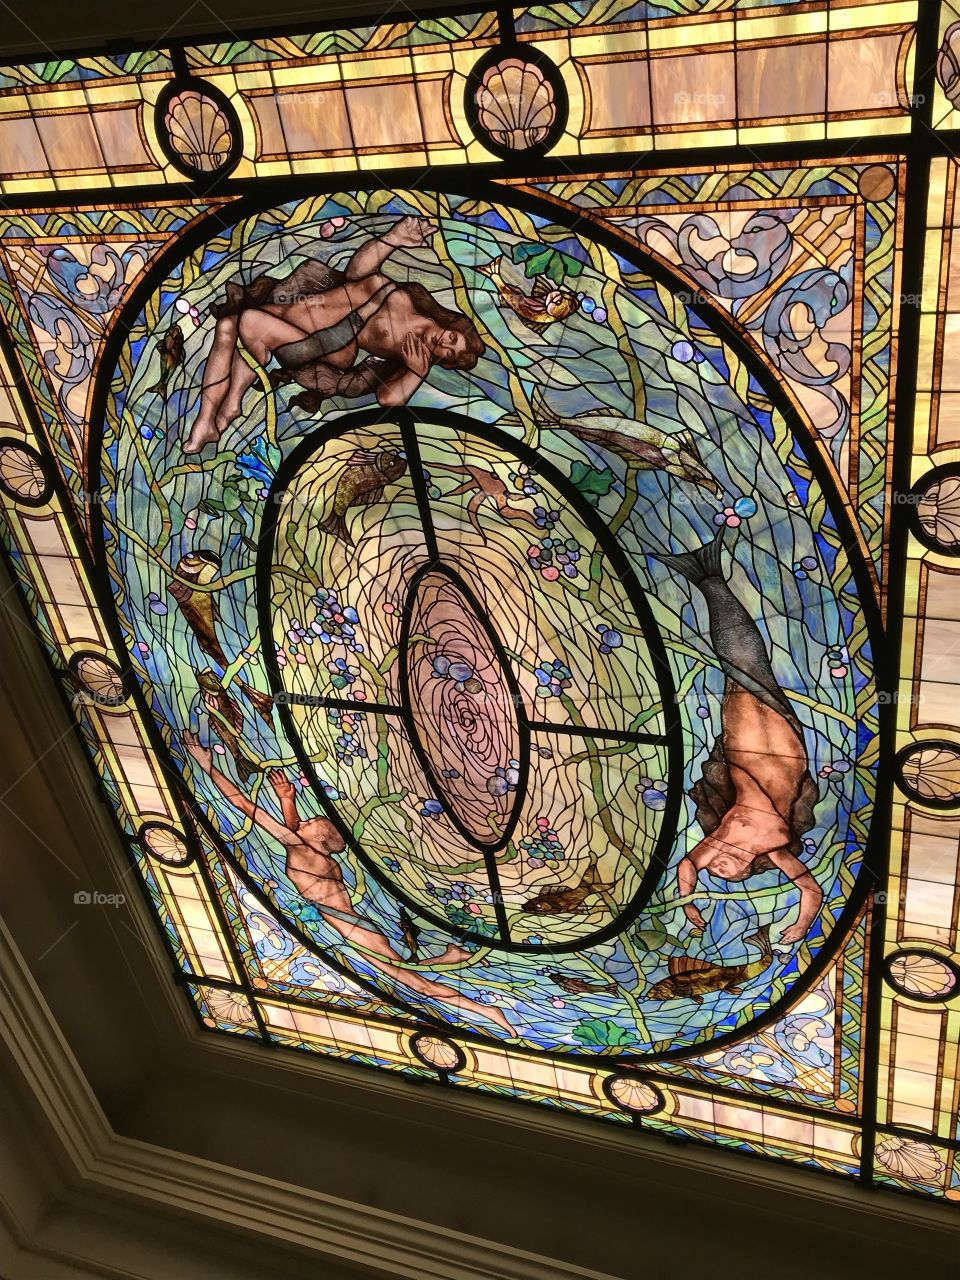 Stained glass hot springs bathhouse 